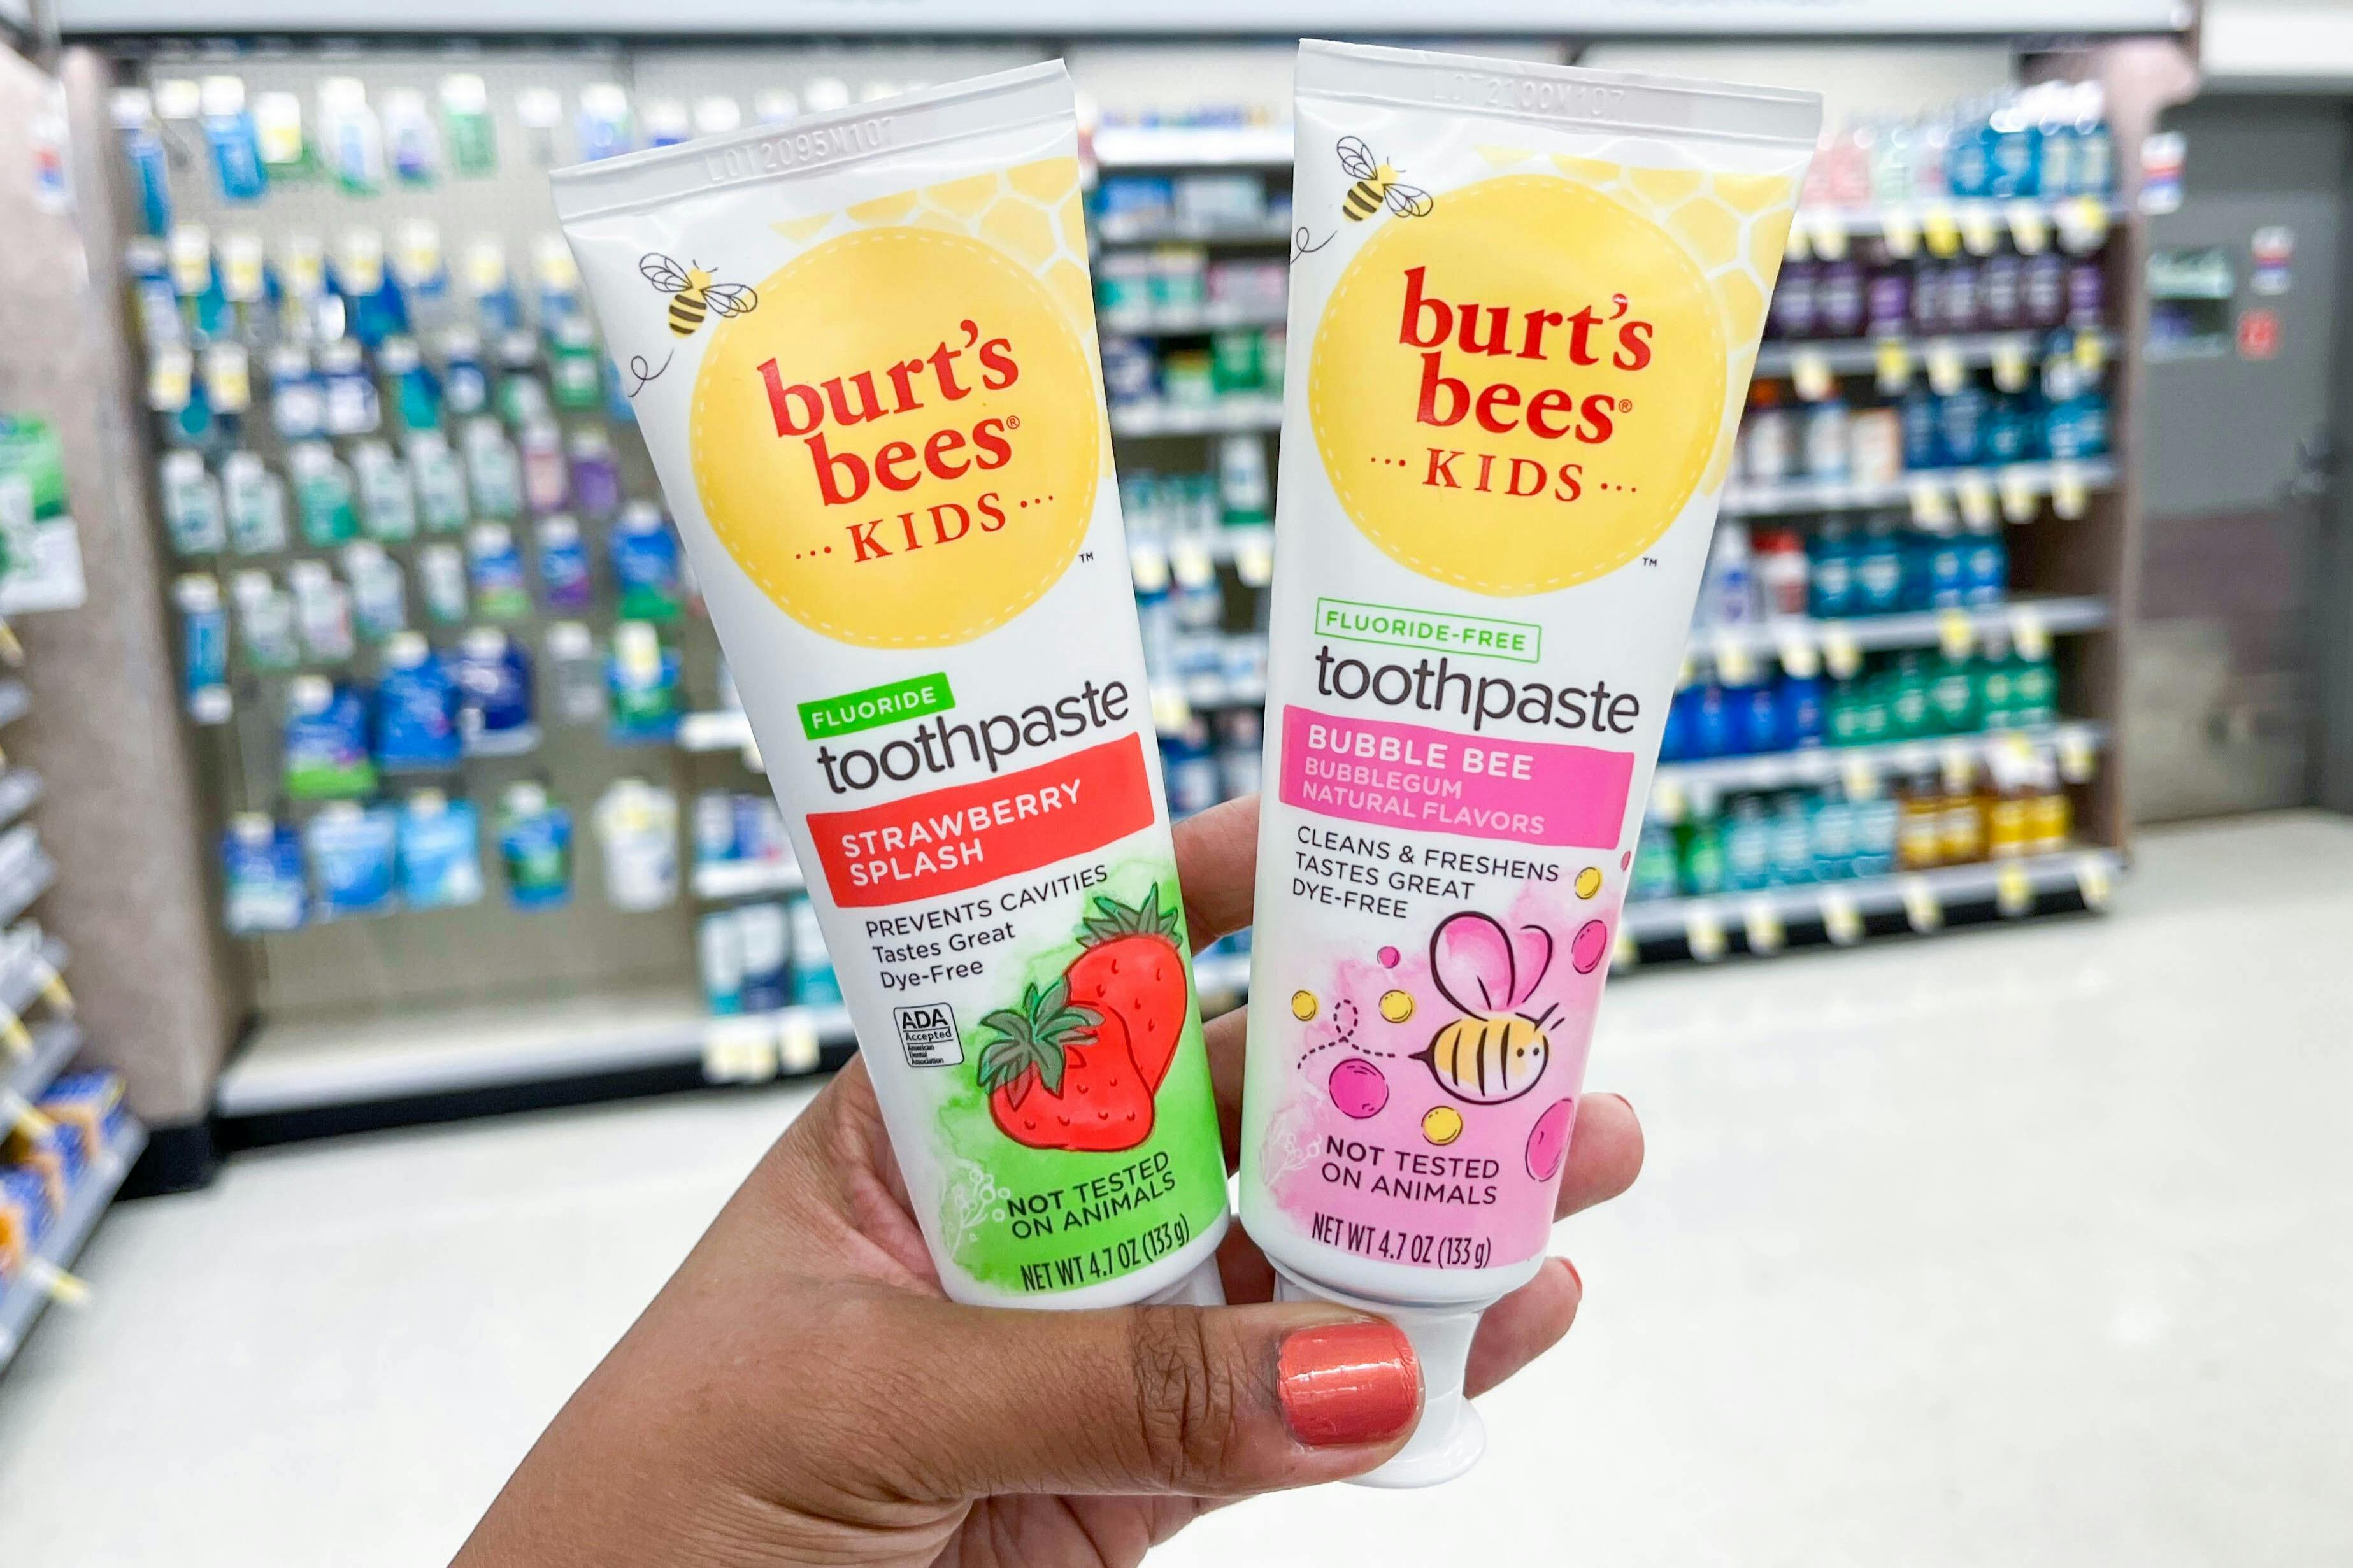 Burt's Bees Kids and Kid's Crest Toothpaste, $1.16 Each at Walgreens ...